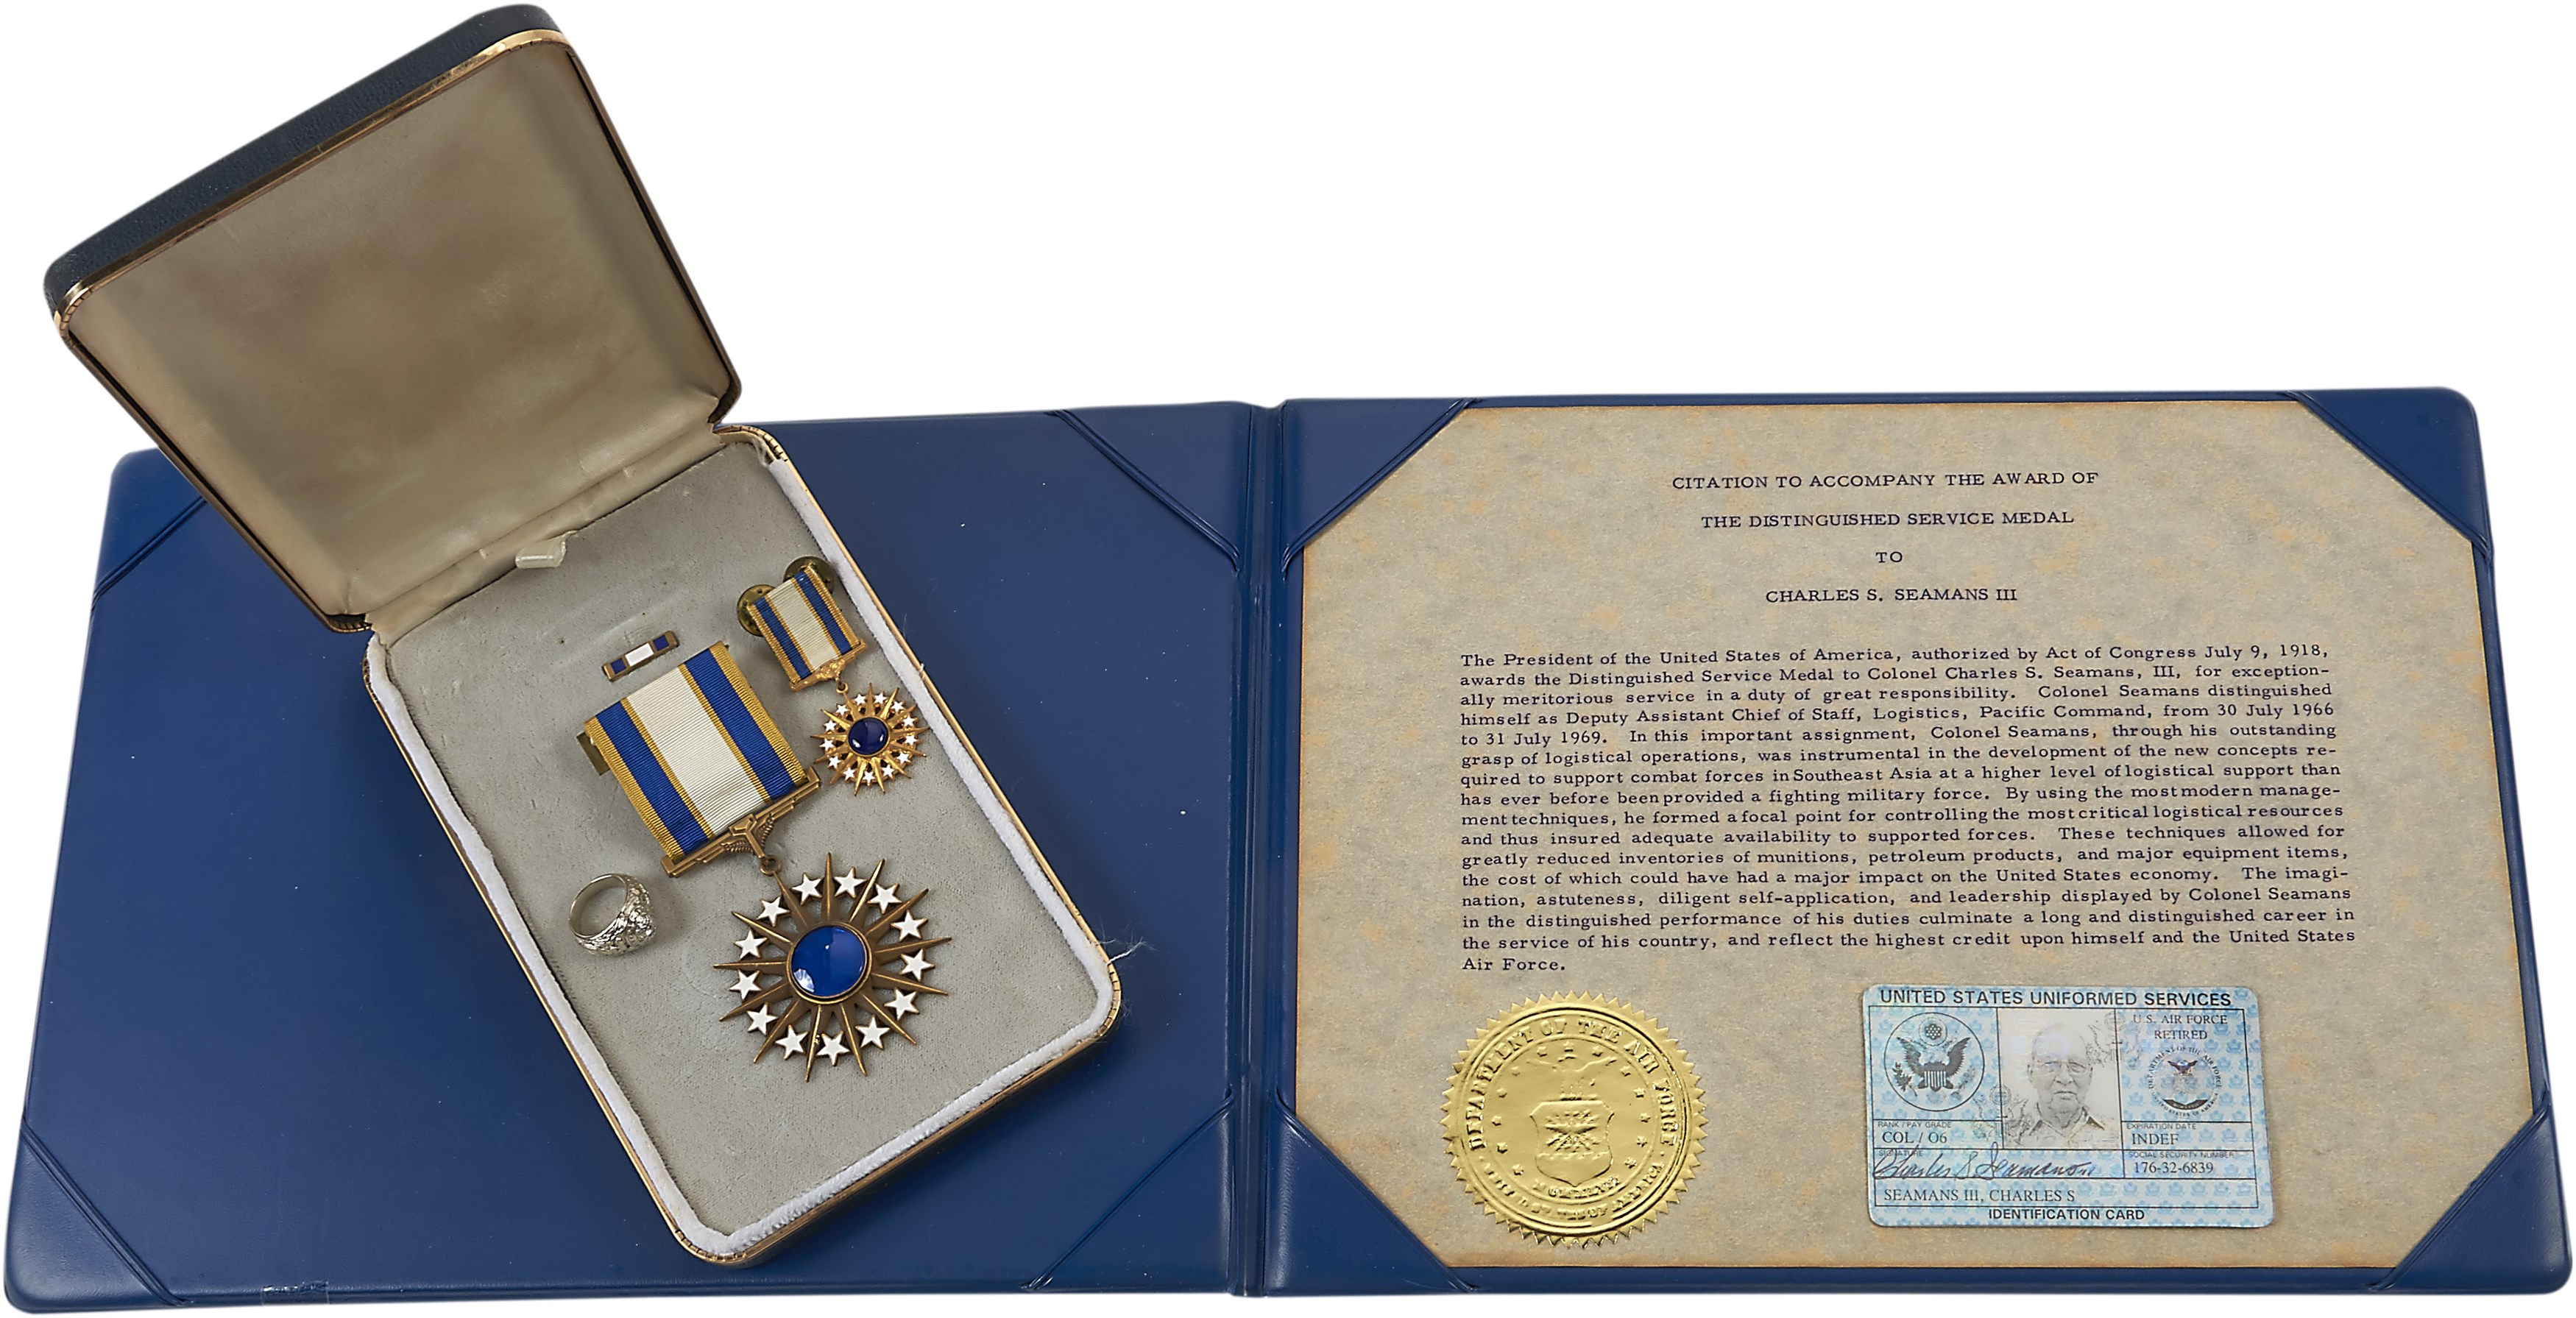 Rock And Pop Culture - 1969 Distinguished Service Medals & 1941 West Point Platinum Diamond Ring Presented to Charles Seamans III